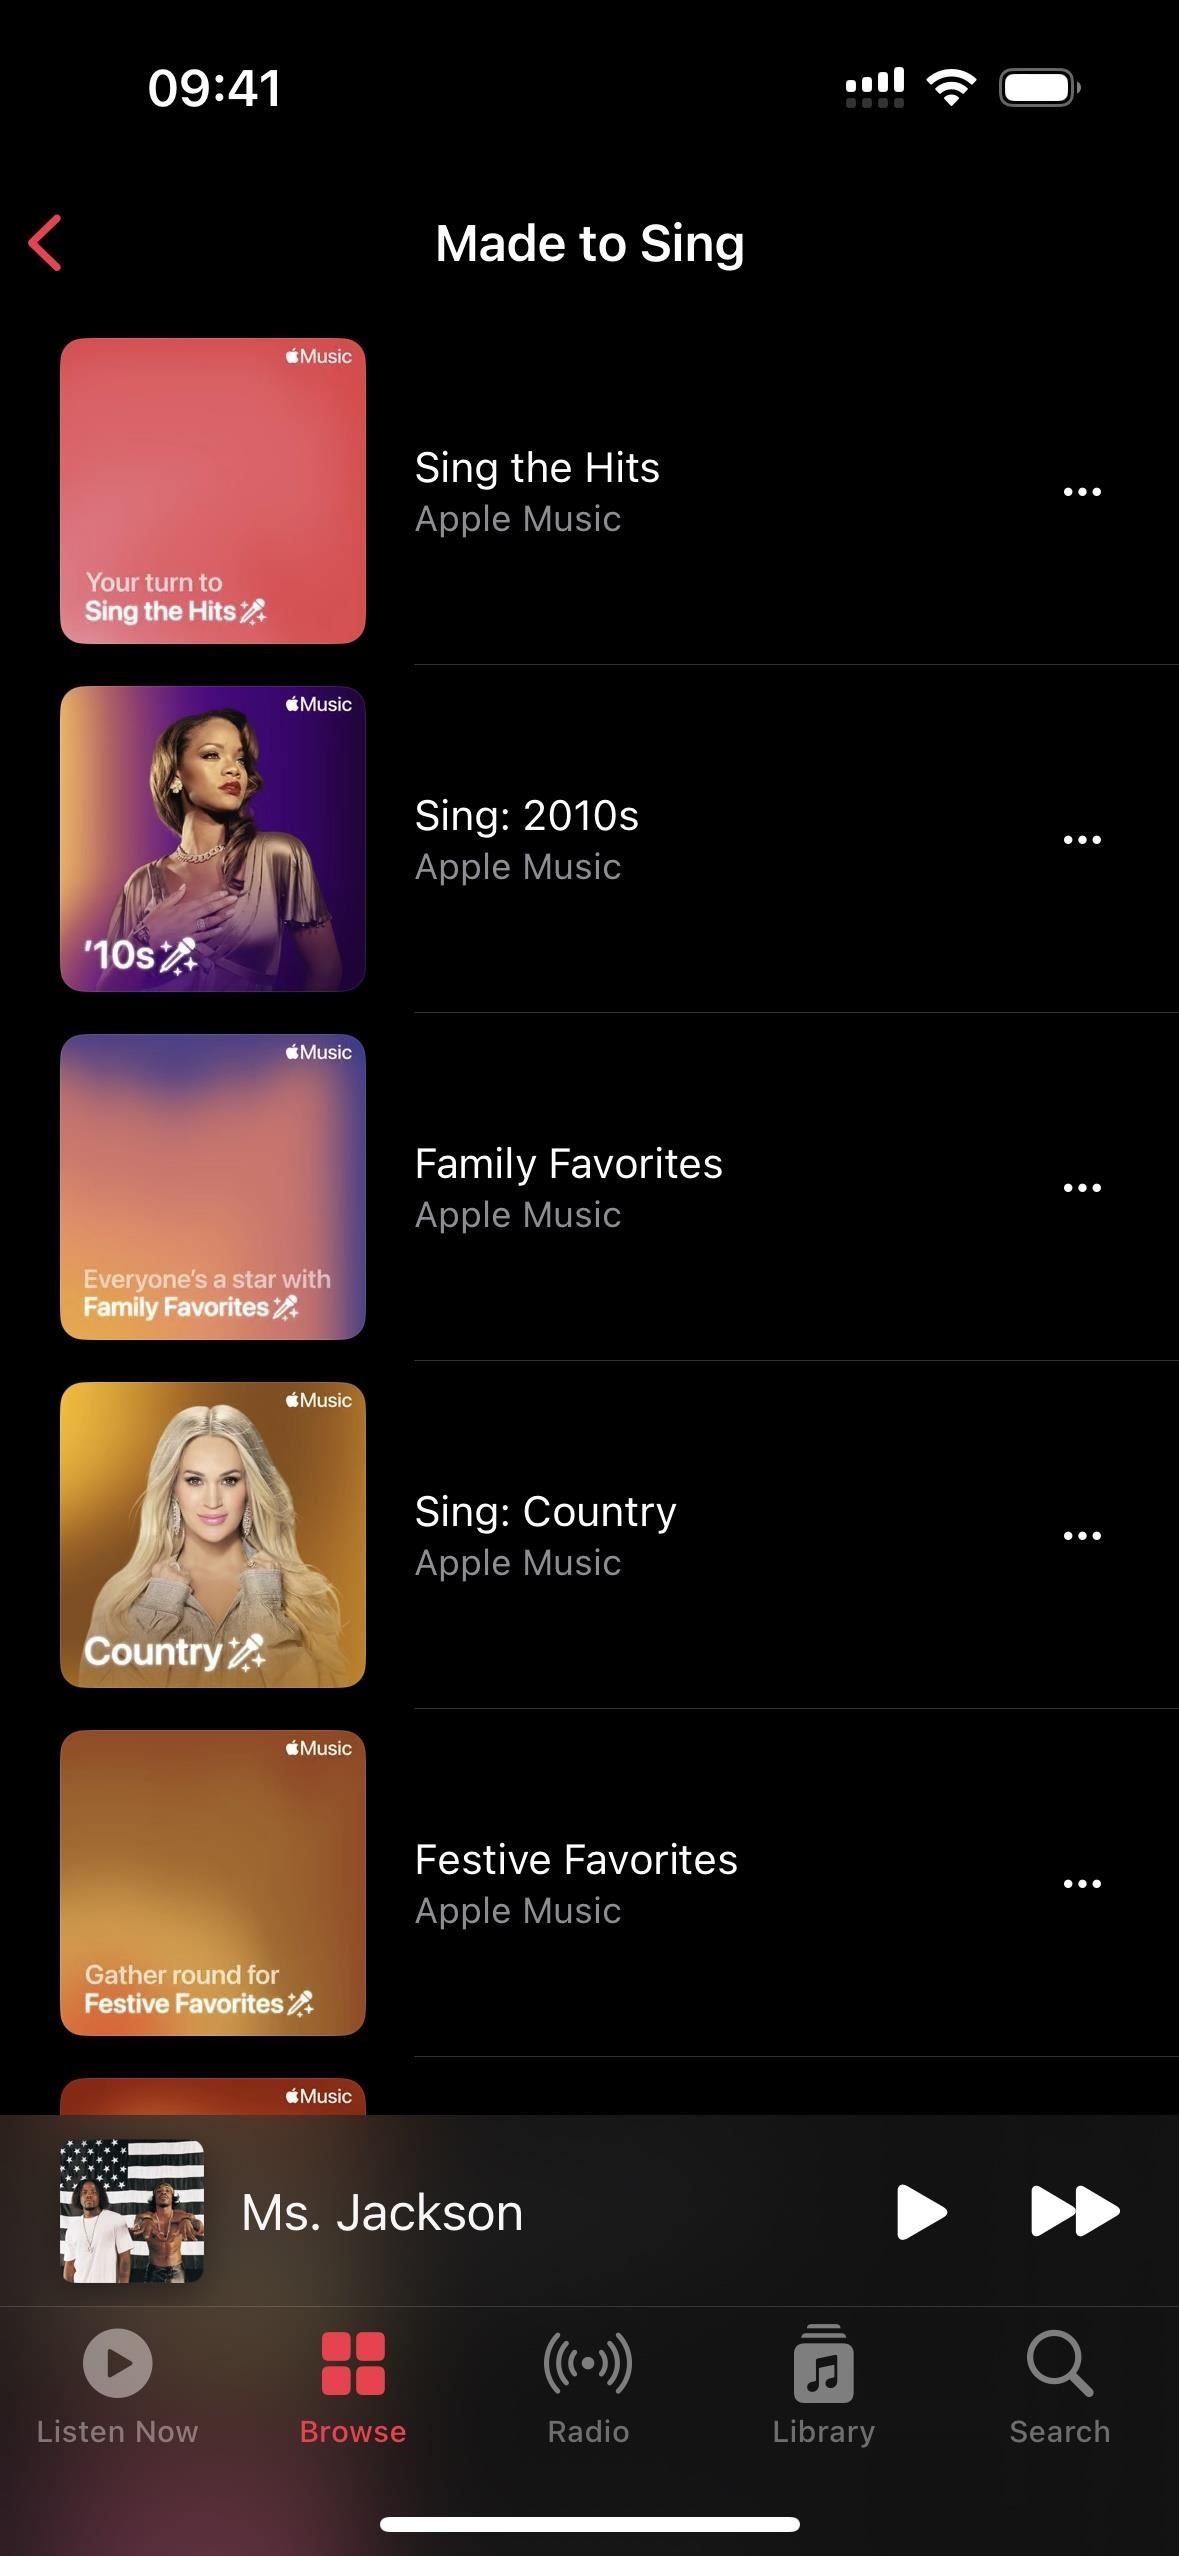 Use Apple Music's New Sing Mode for Karaoke on Your iPhone Anywhere You Go